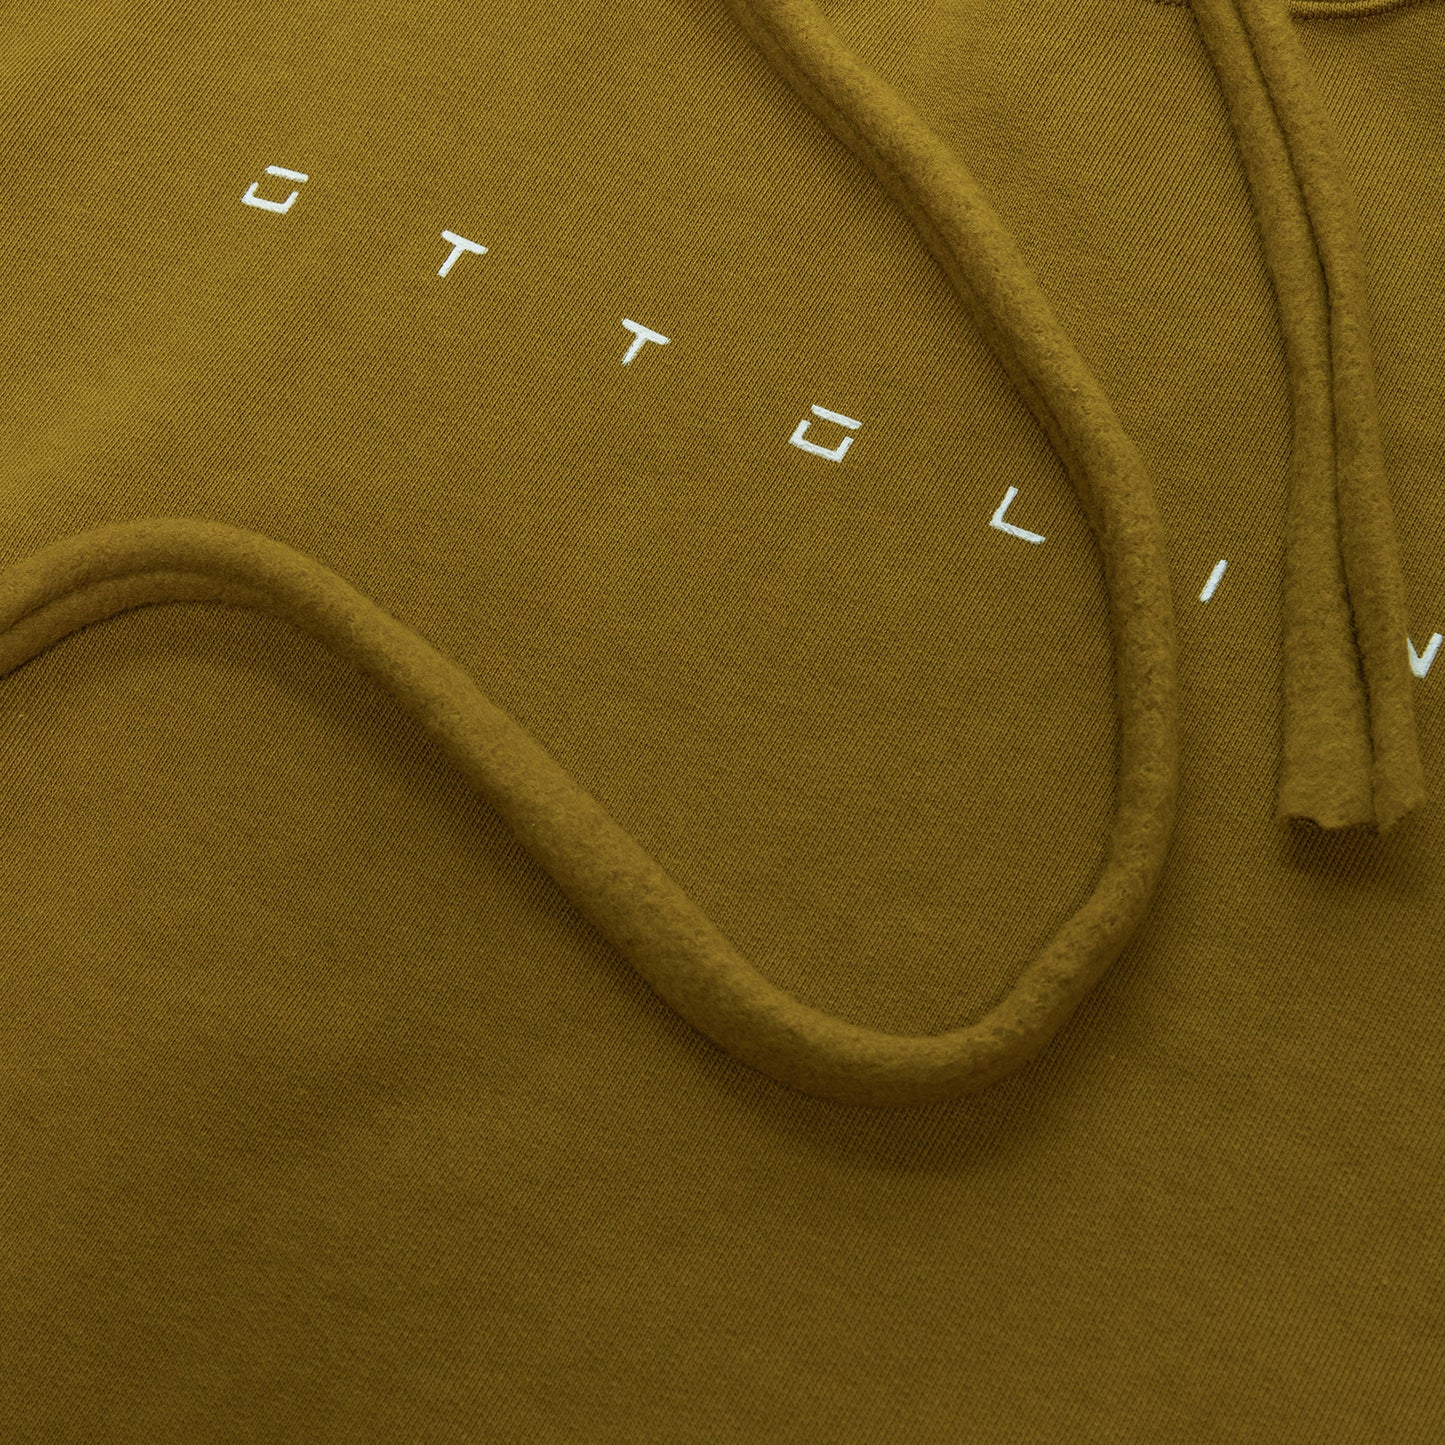 Ottolinger x Tomorrow Deconstructed Hoodie (Military Green)